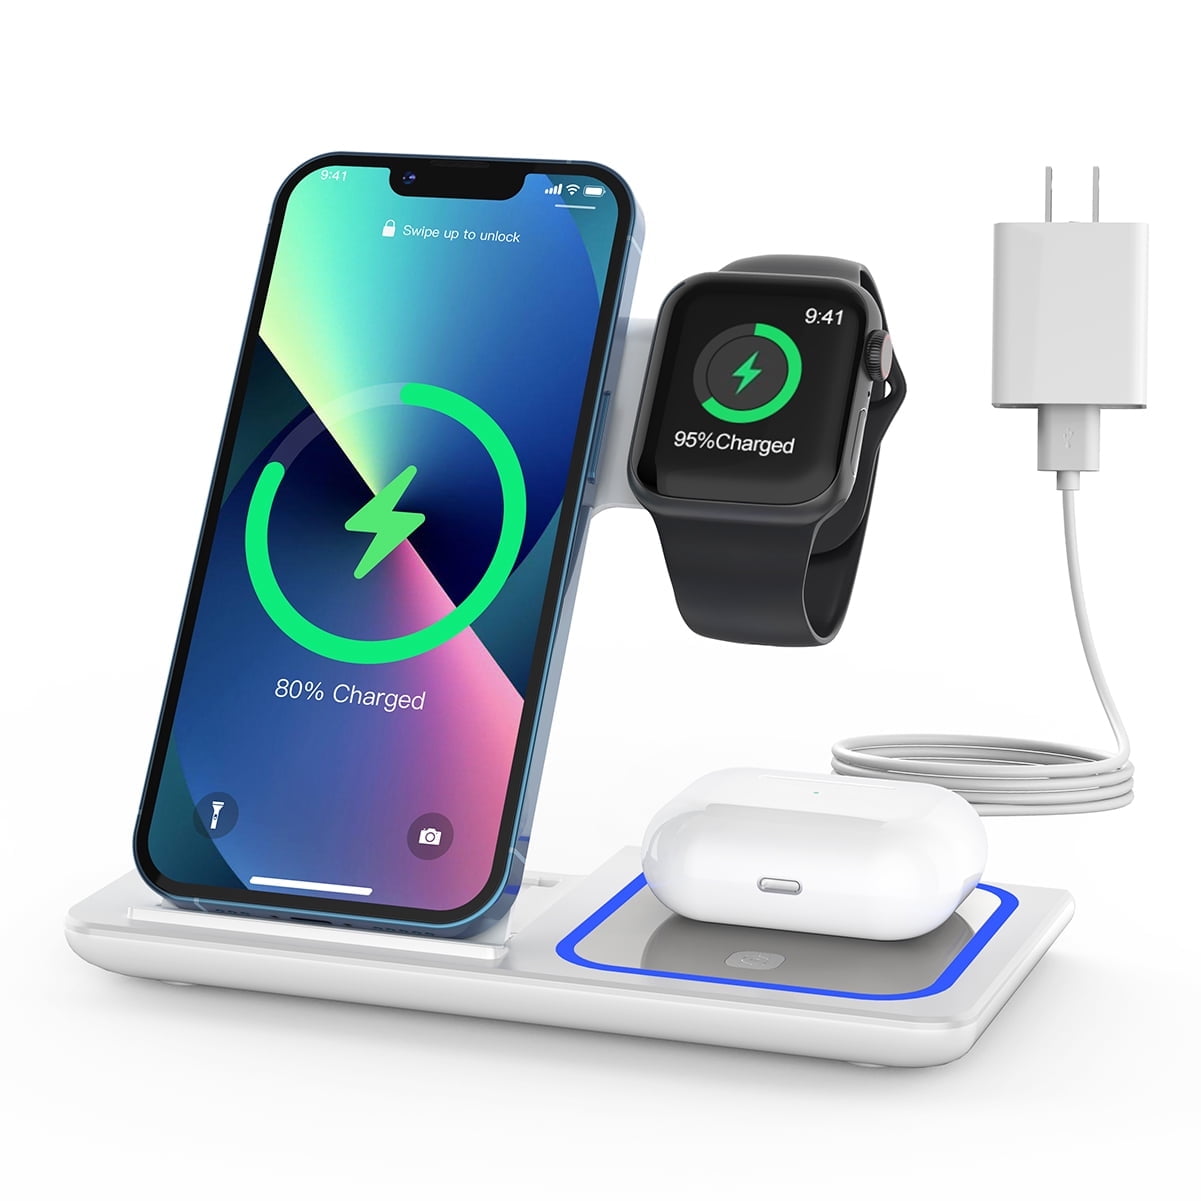 Wireless Charger, 3 in 1 Fast Charging Station, iPhone 13 12/SE/11/11 Pro/X/XS/XR/Xs Max/8 Plus, Charging Stand for AirPods Pro/2, Compatible Apple Watch Series 5/4/3/2/SE - Walmart.com